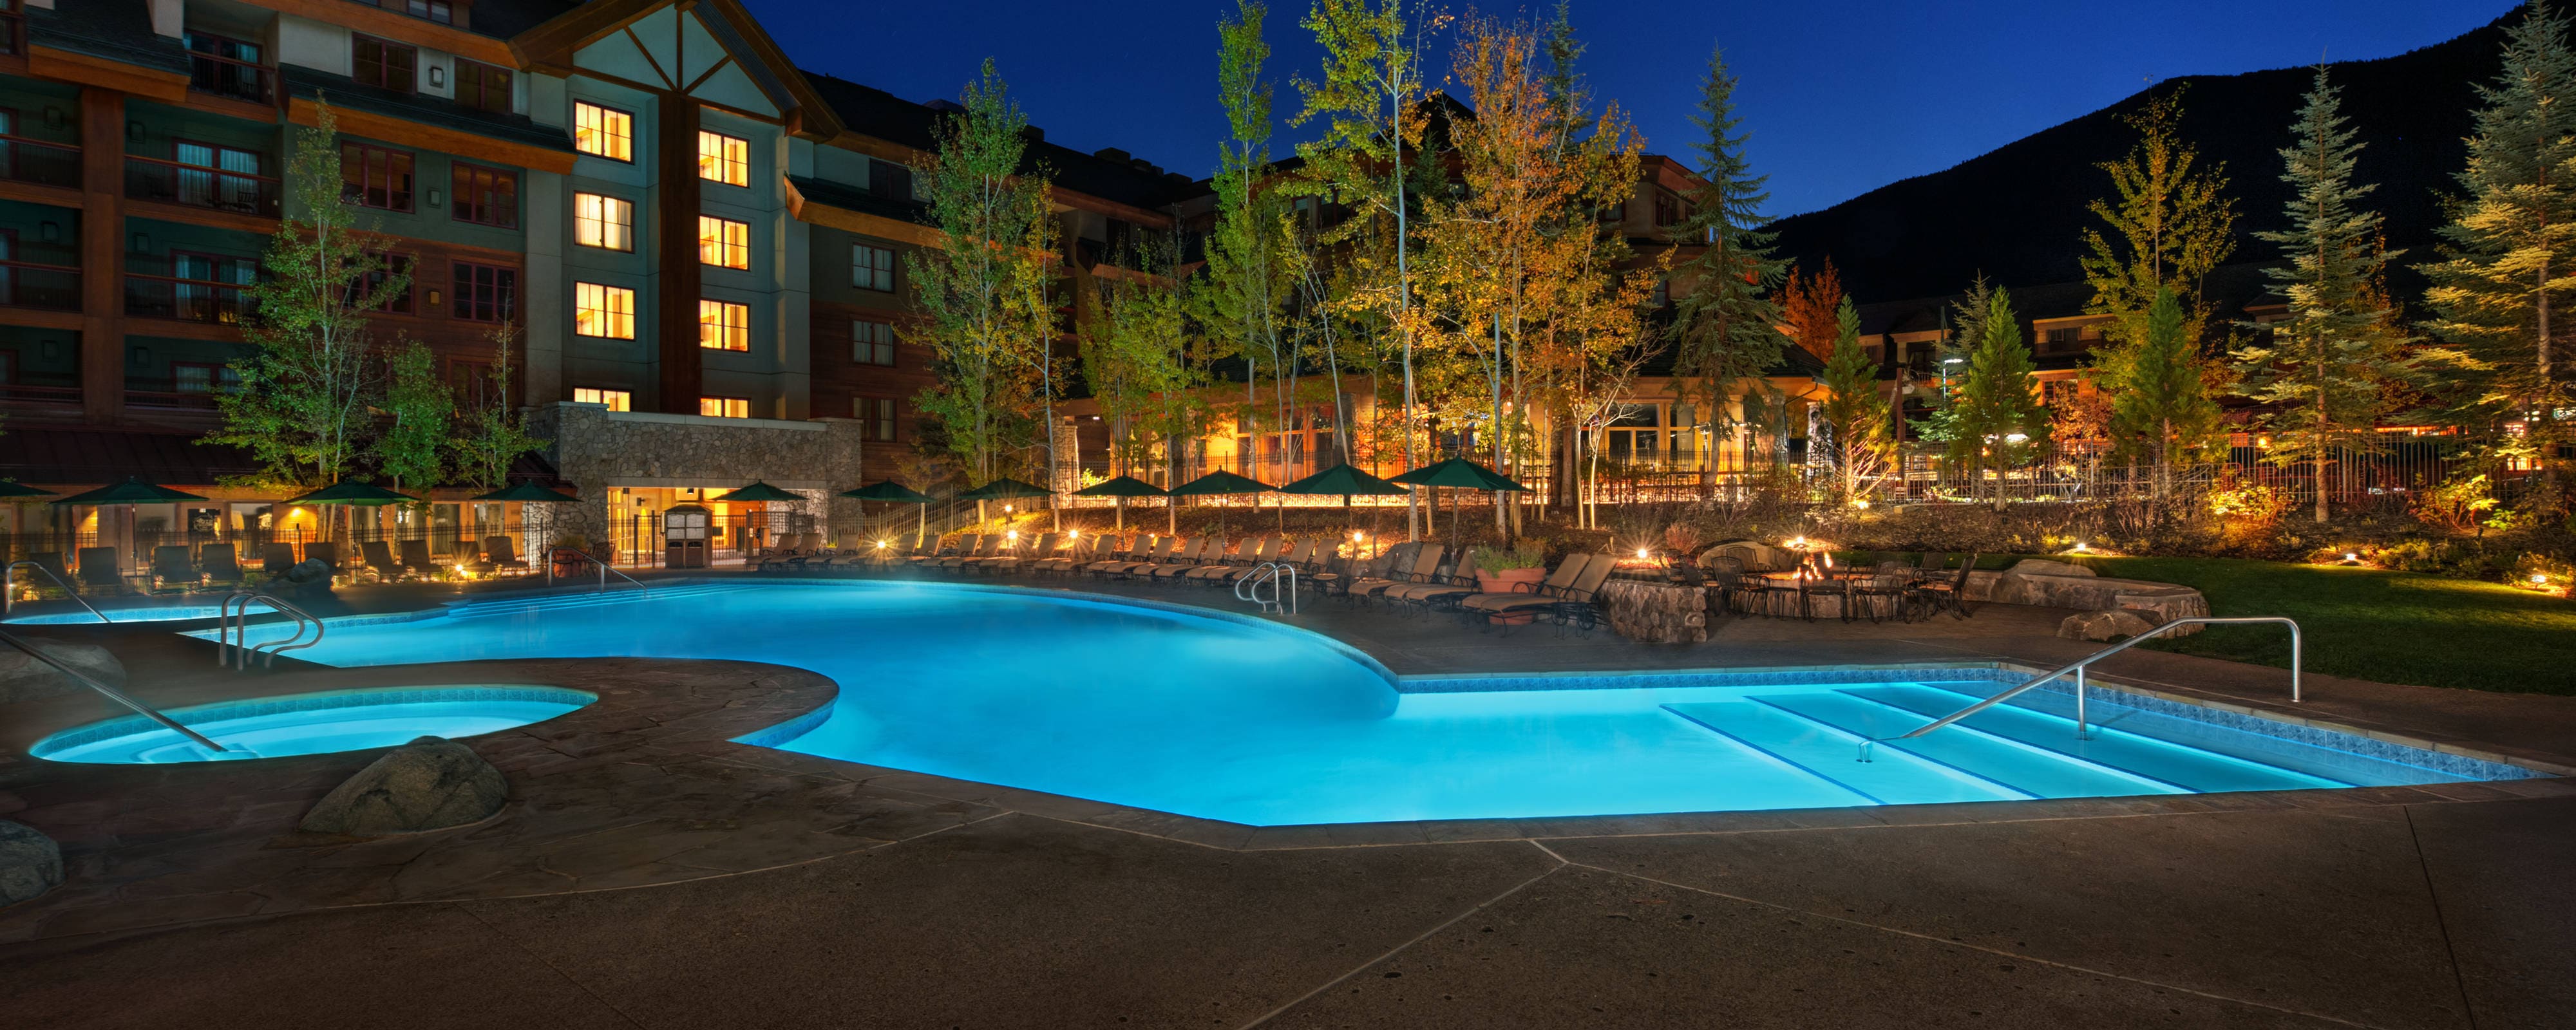 Lake Tahoe Resort with Whirlpool | Grand Residences by ...